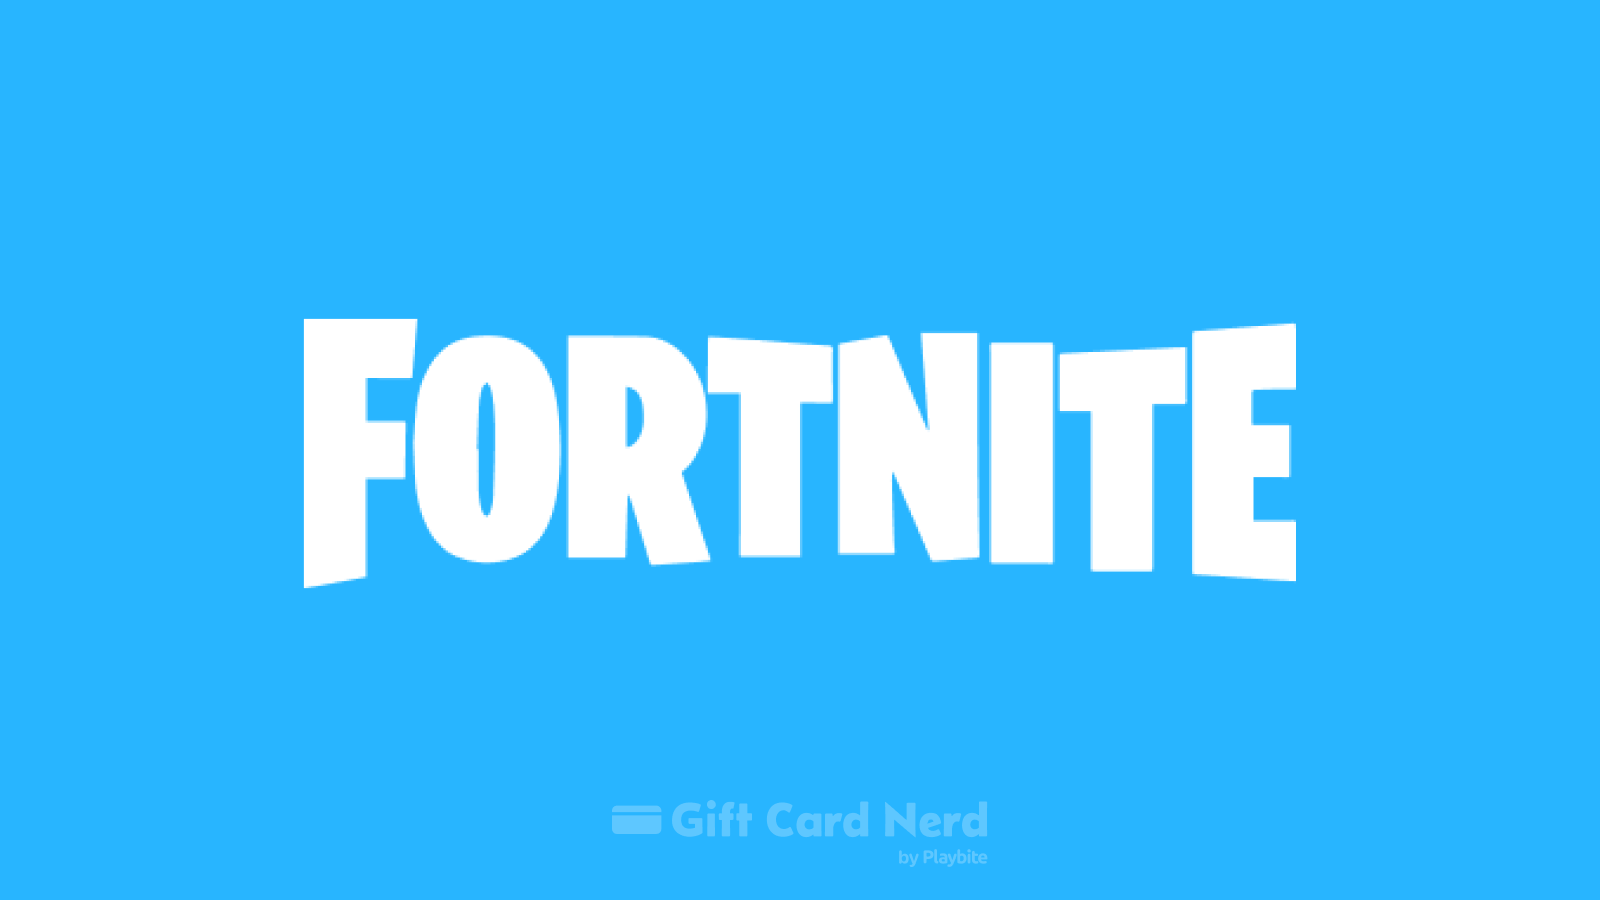 Does Game Stop Sell Fortnite Gift Cards?